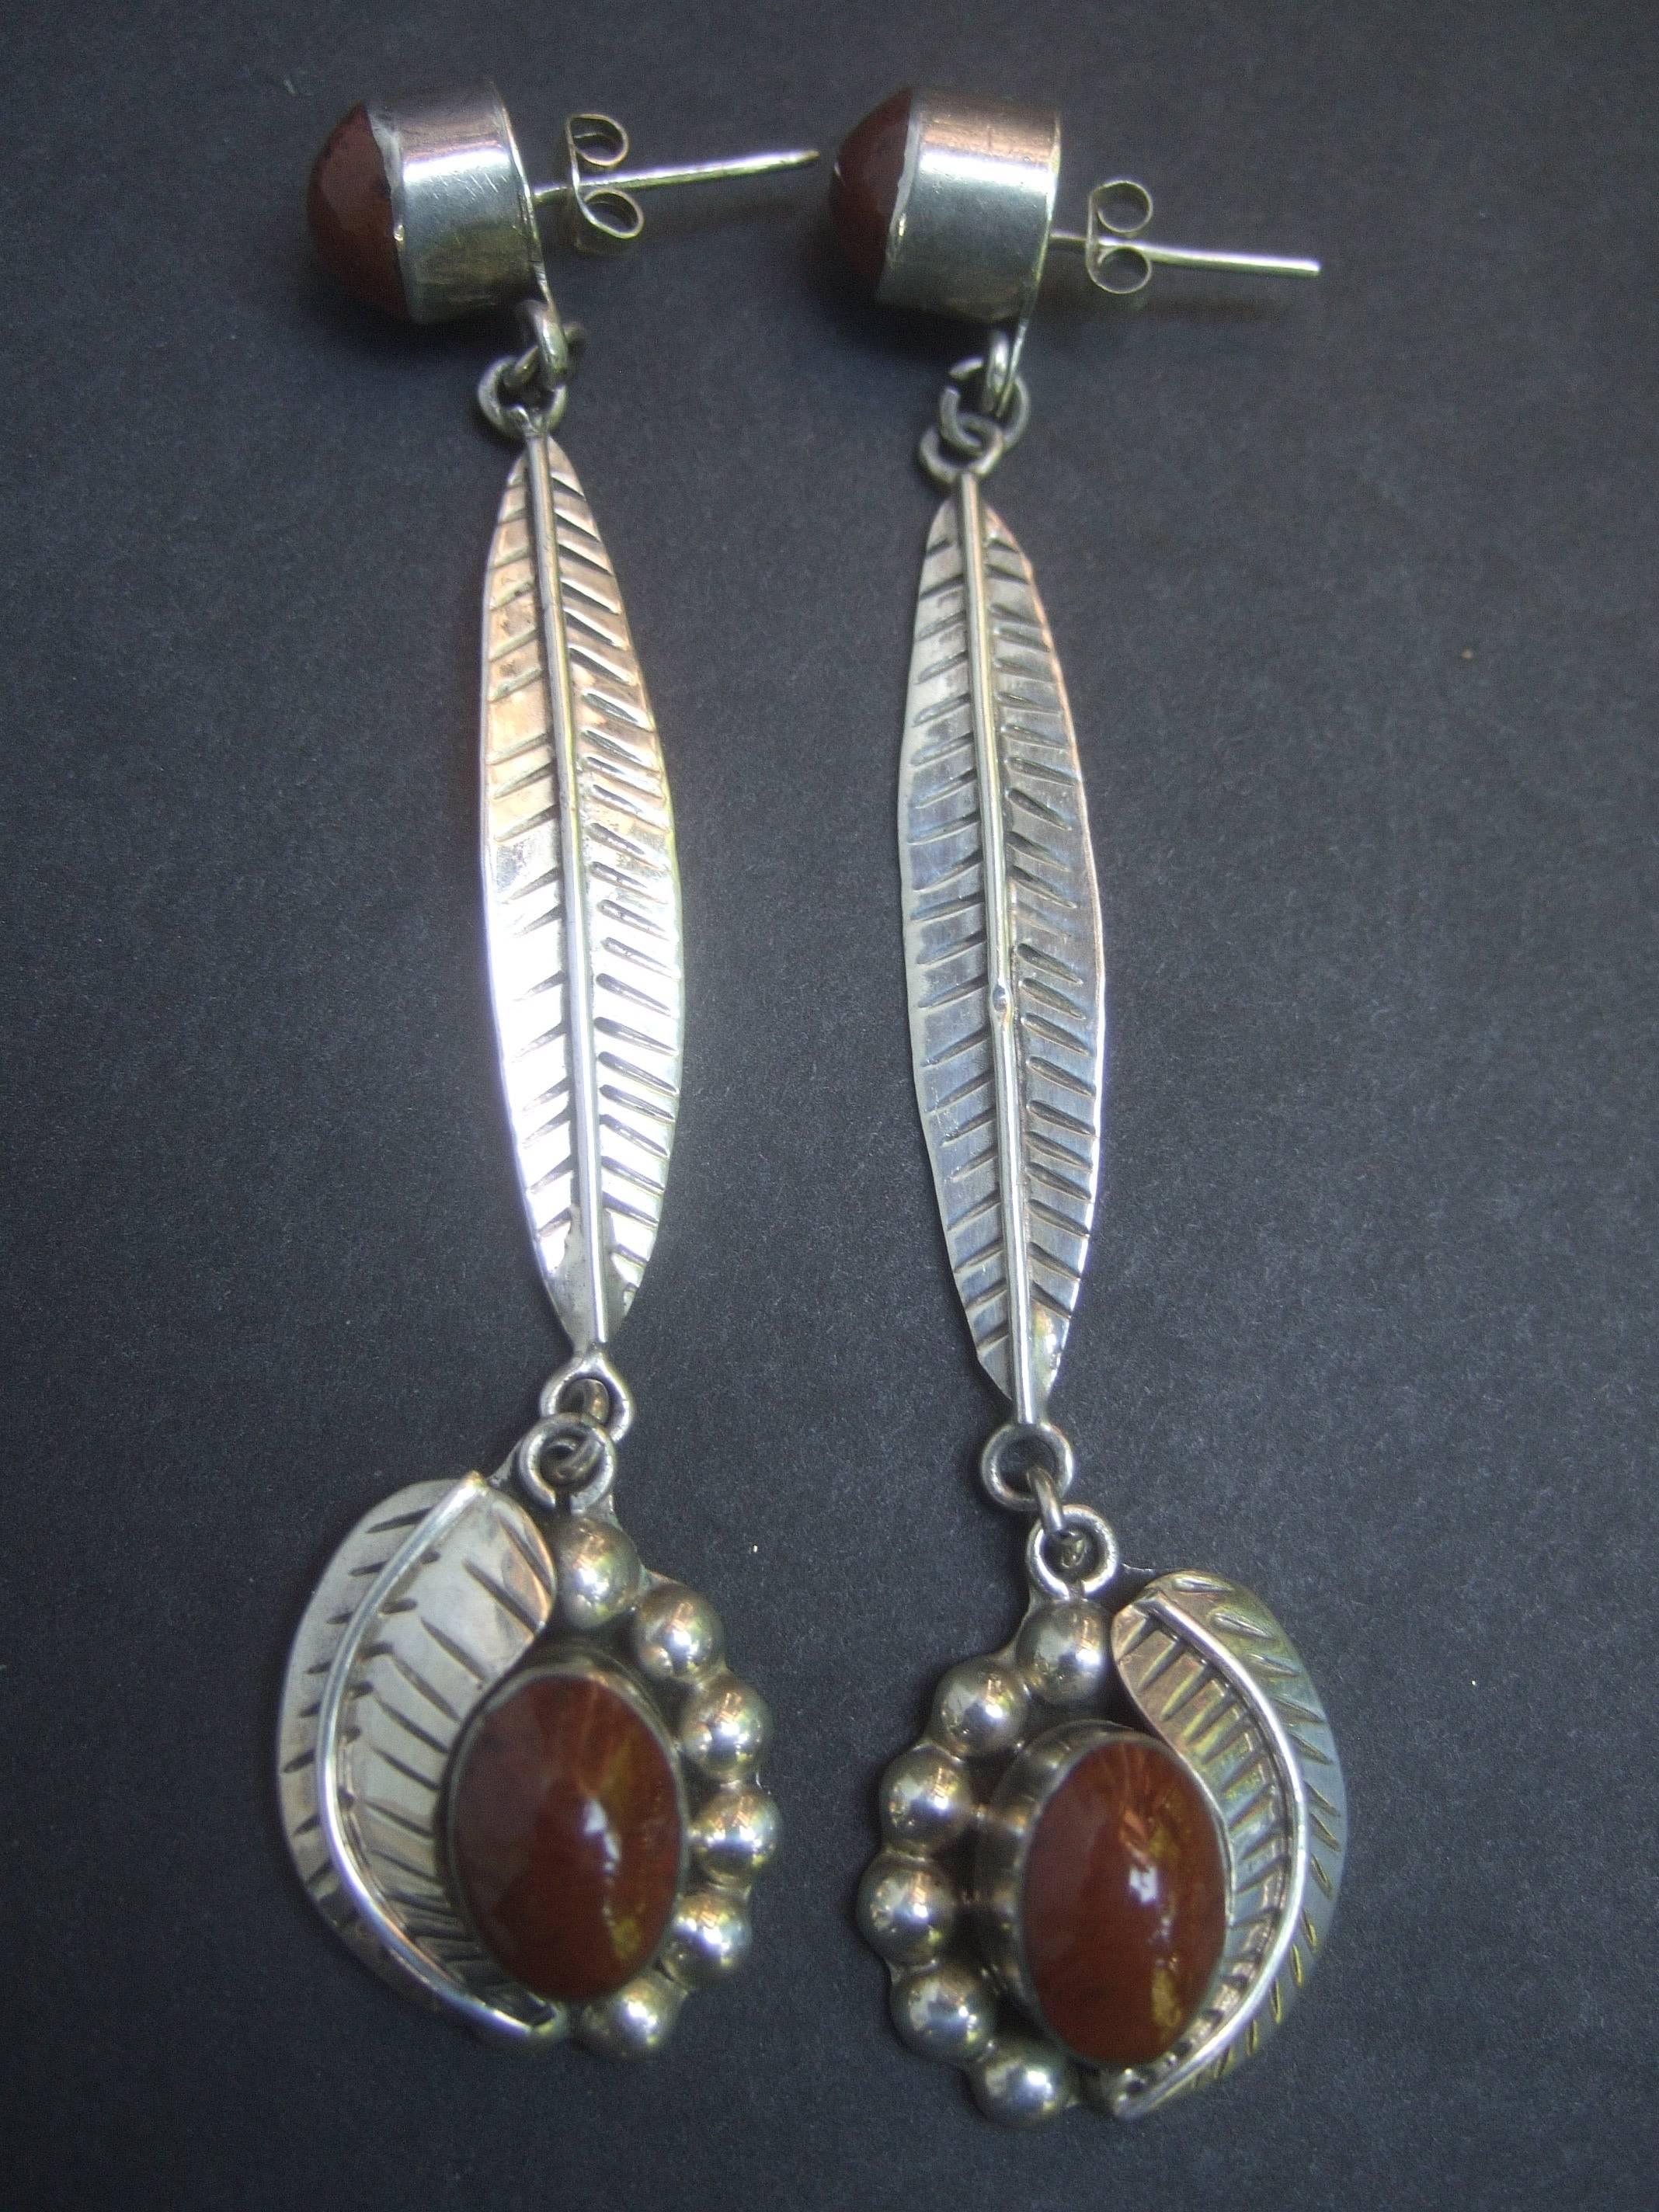 Sterling artisan Mexican statement earrings ca 1980s 
The unique large scale pierced earrings are designed
with elongated etched sterling bands in a leaf pattern

Dangling from the base of the earrings are bezel set 
brown opaque smooth stones